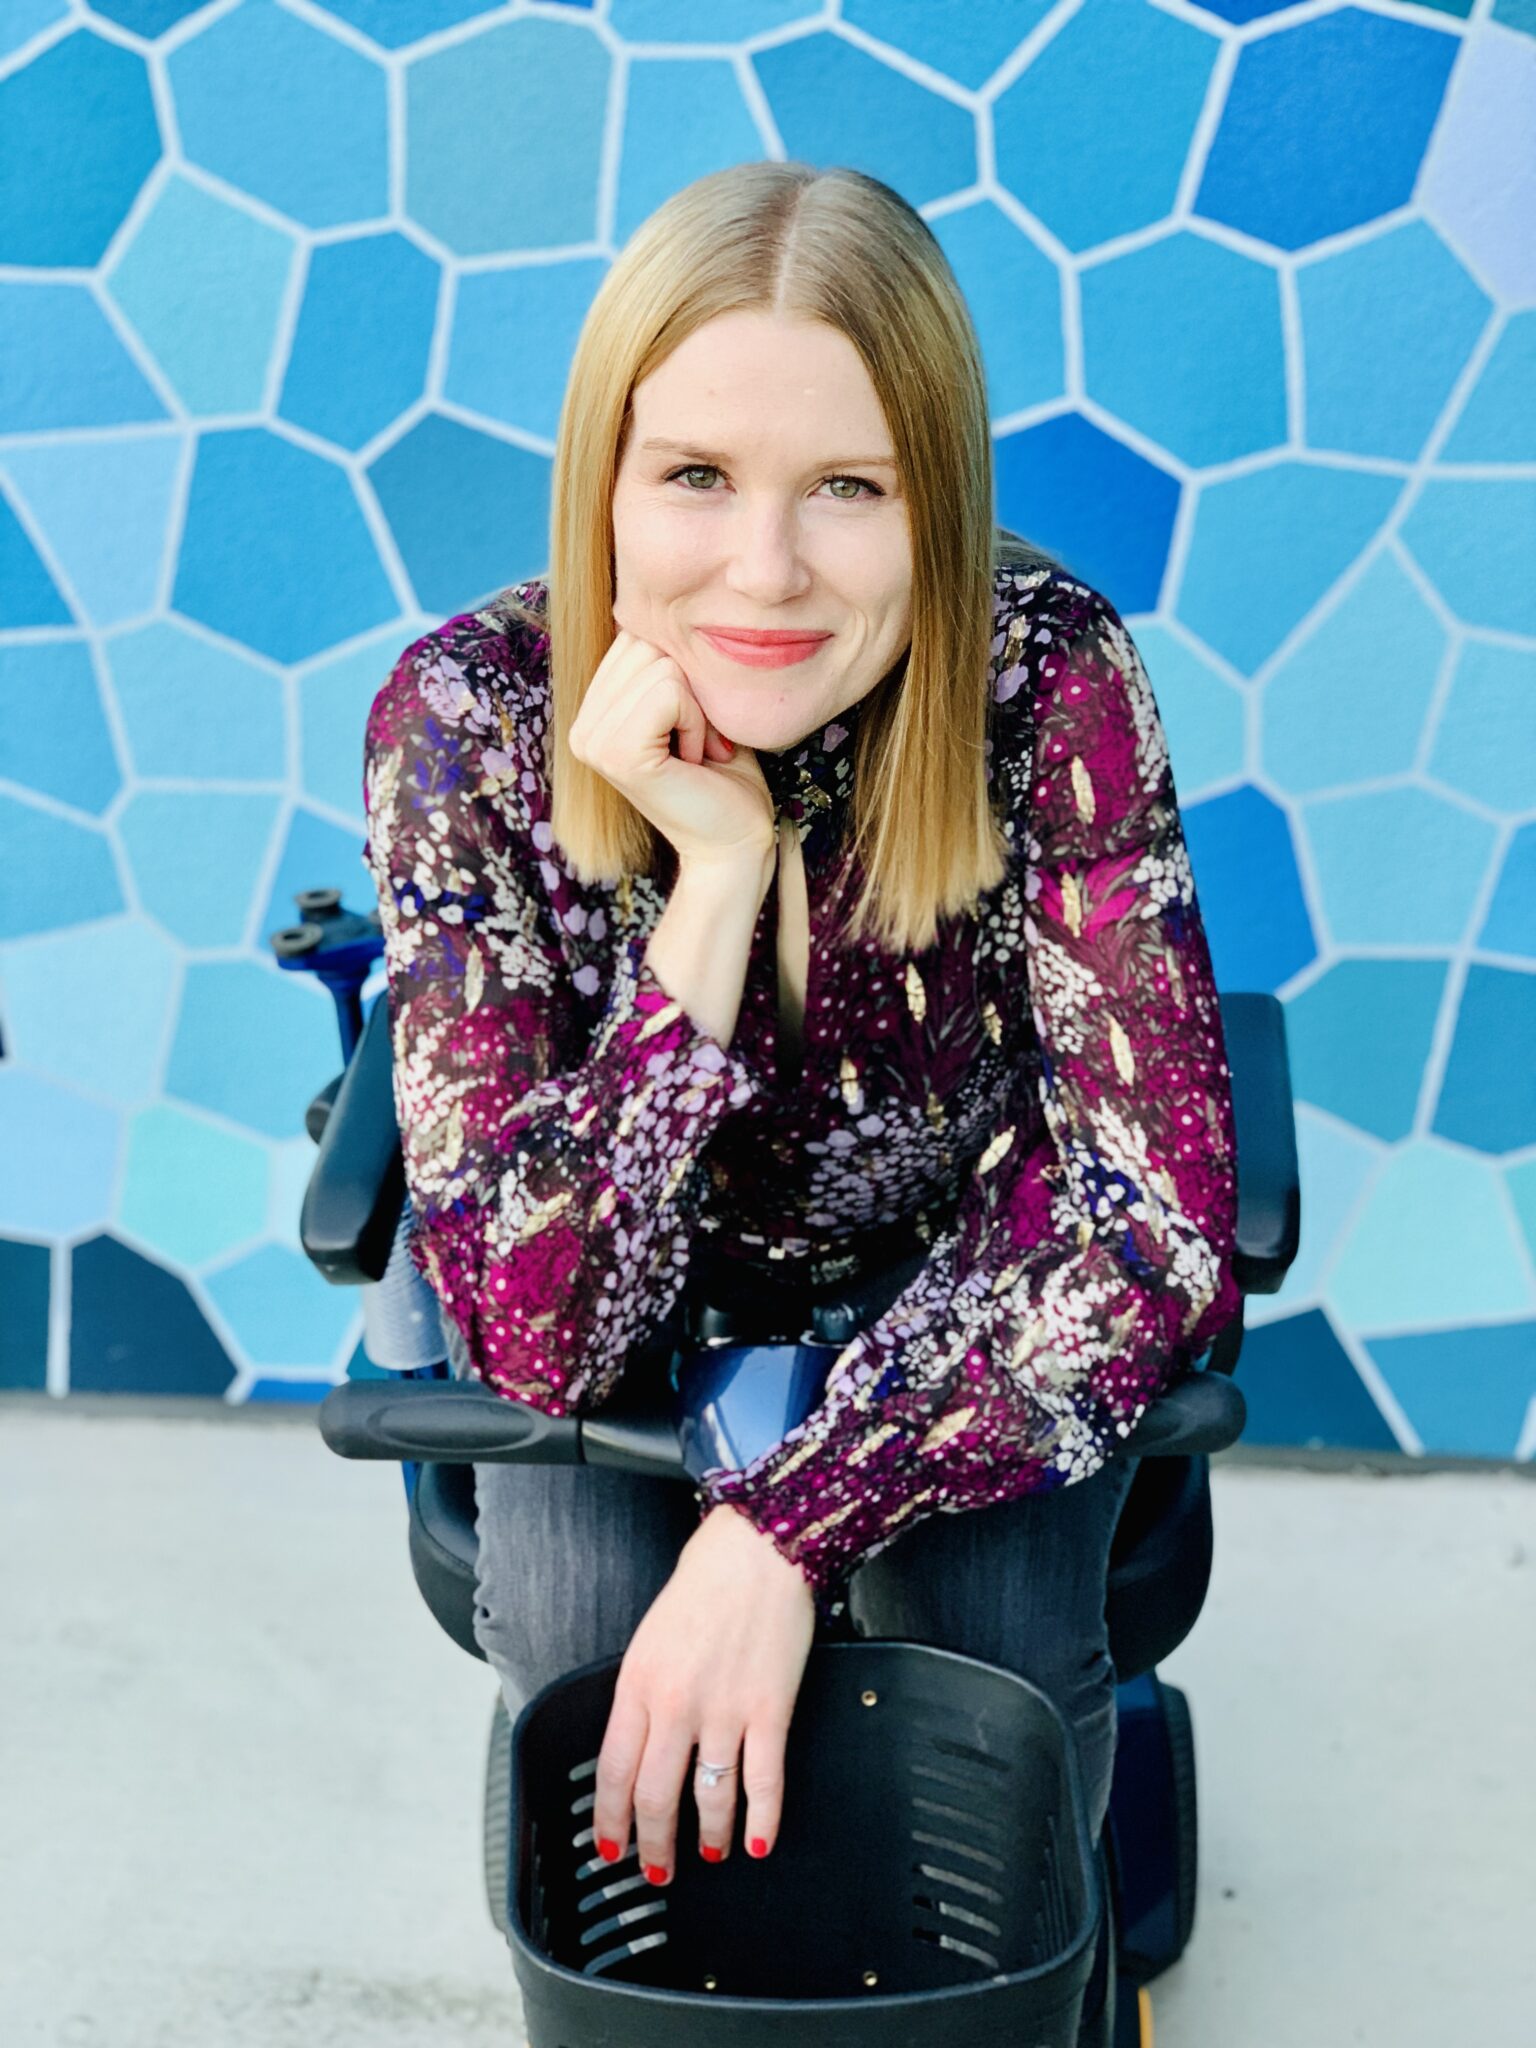 A blonde, white woman wearing a burgundy patterned shirt sits on a mobility scooter in front of a blue background with a variety of geometric shapes.